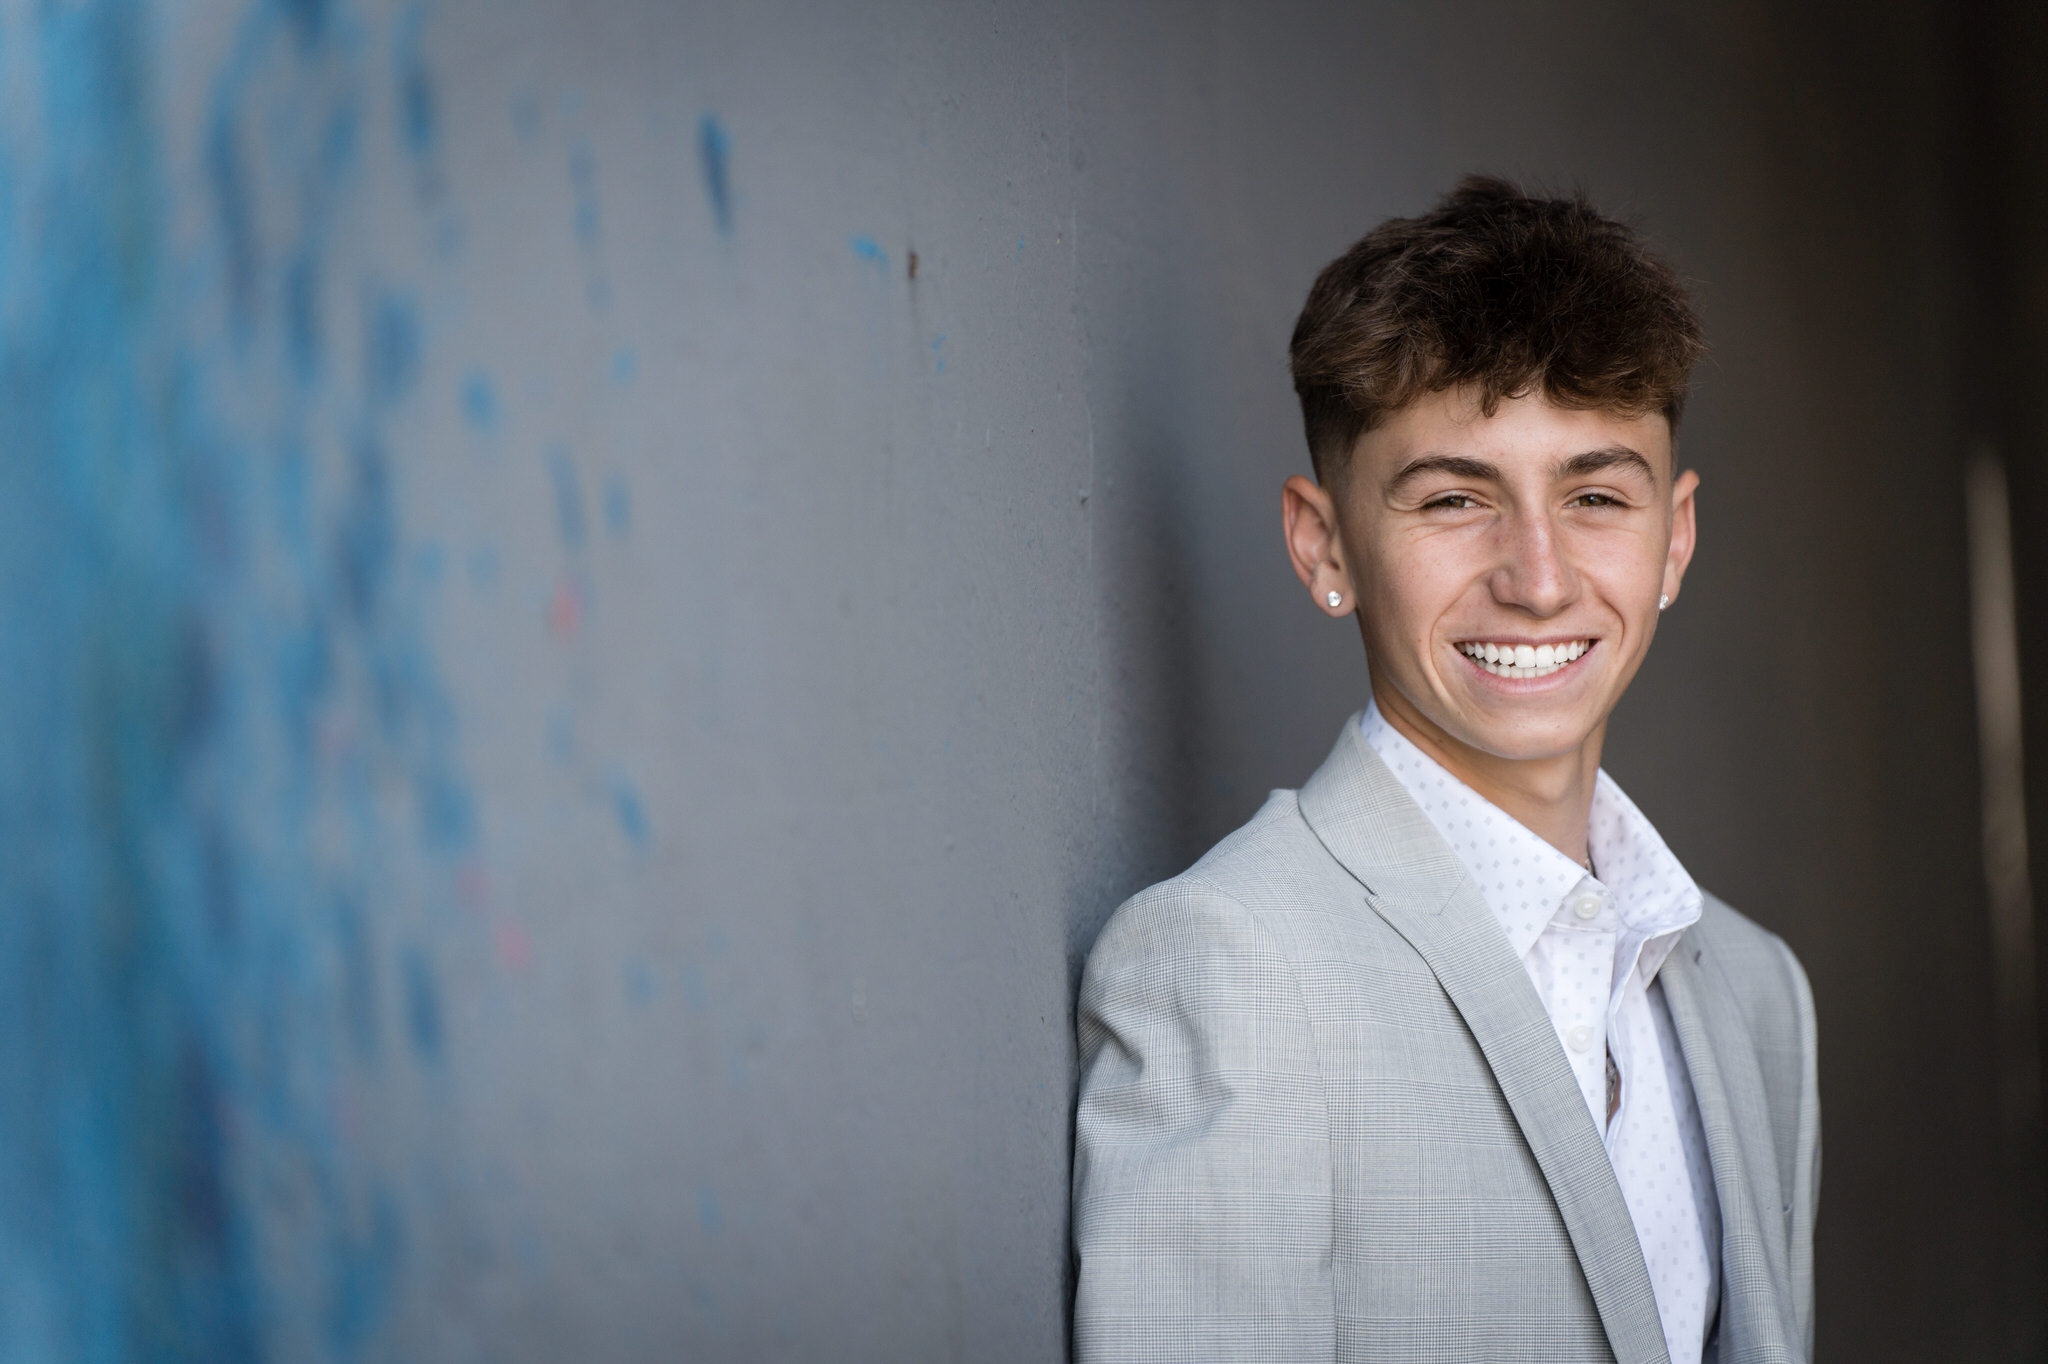 Male poses for a senior photo in Detroit against a grey and blue wall.  